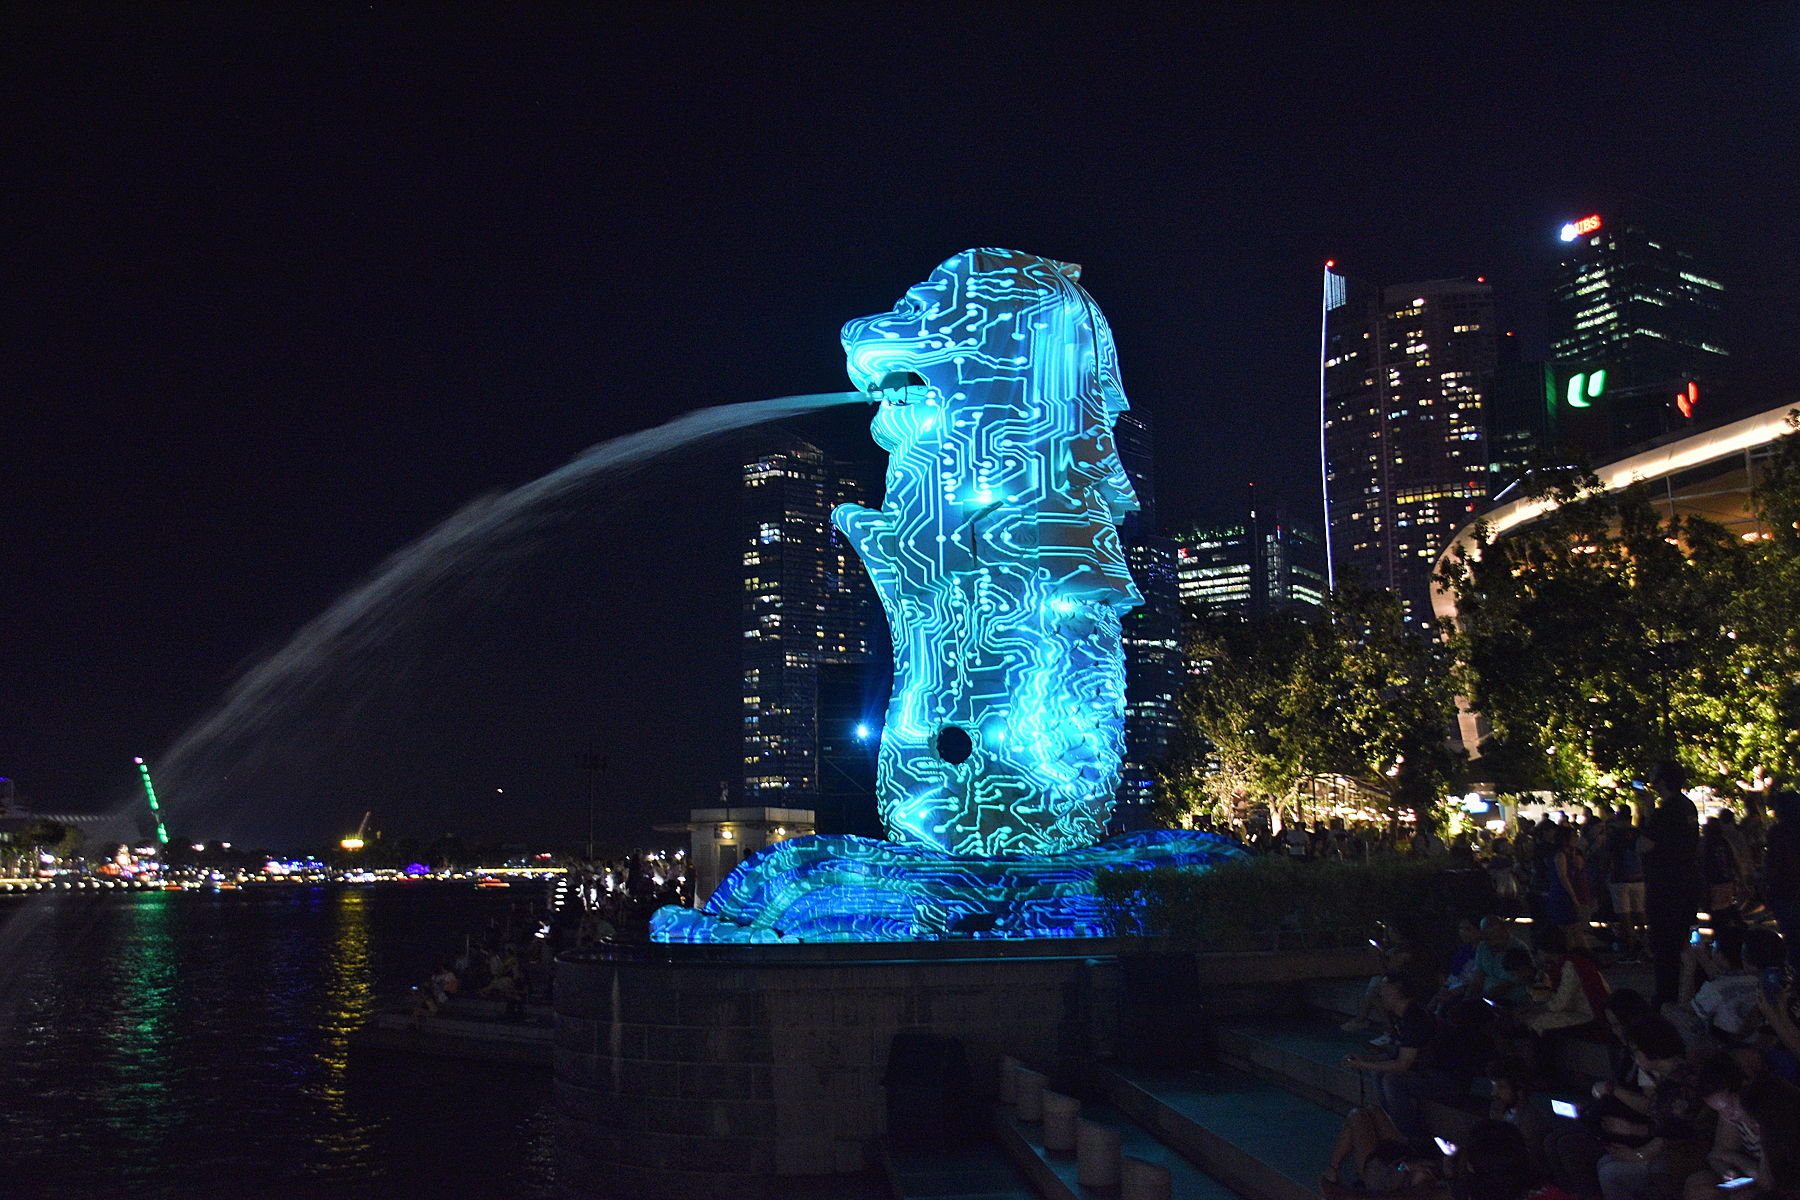 best fireworks viewing spots in singapore - merlion park